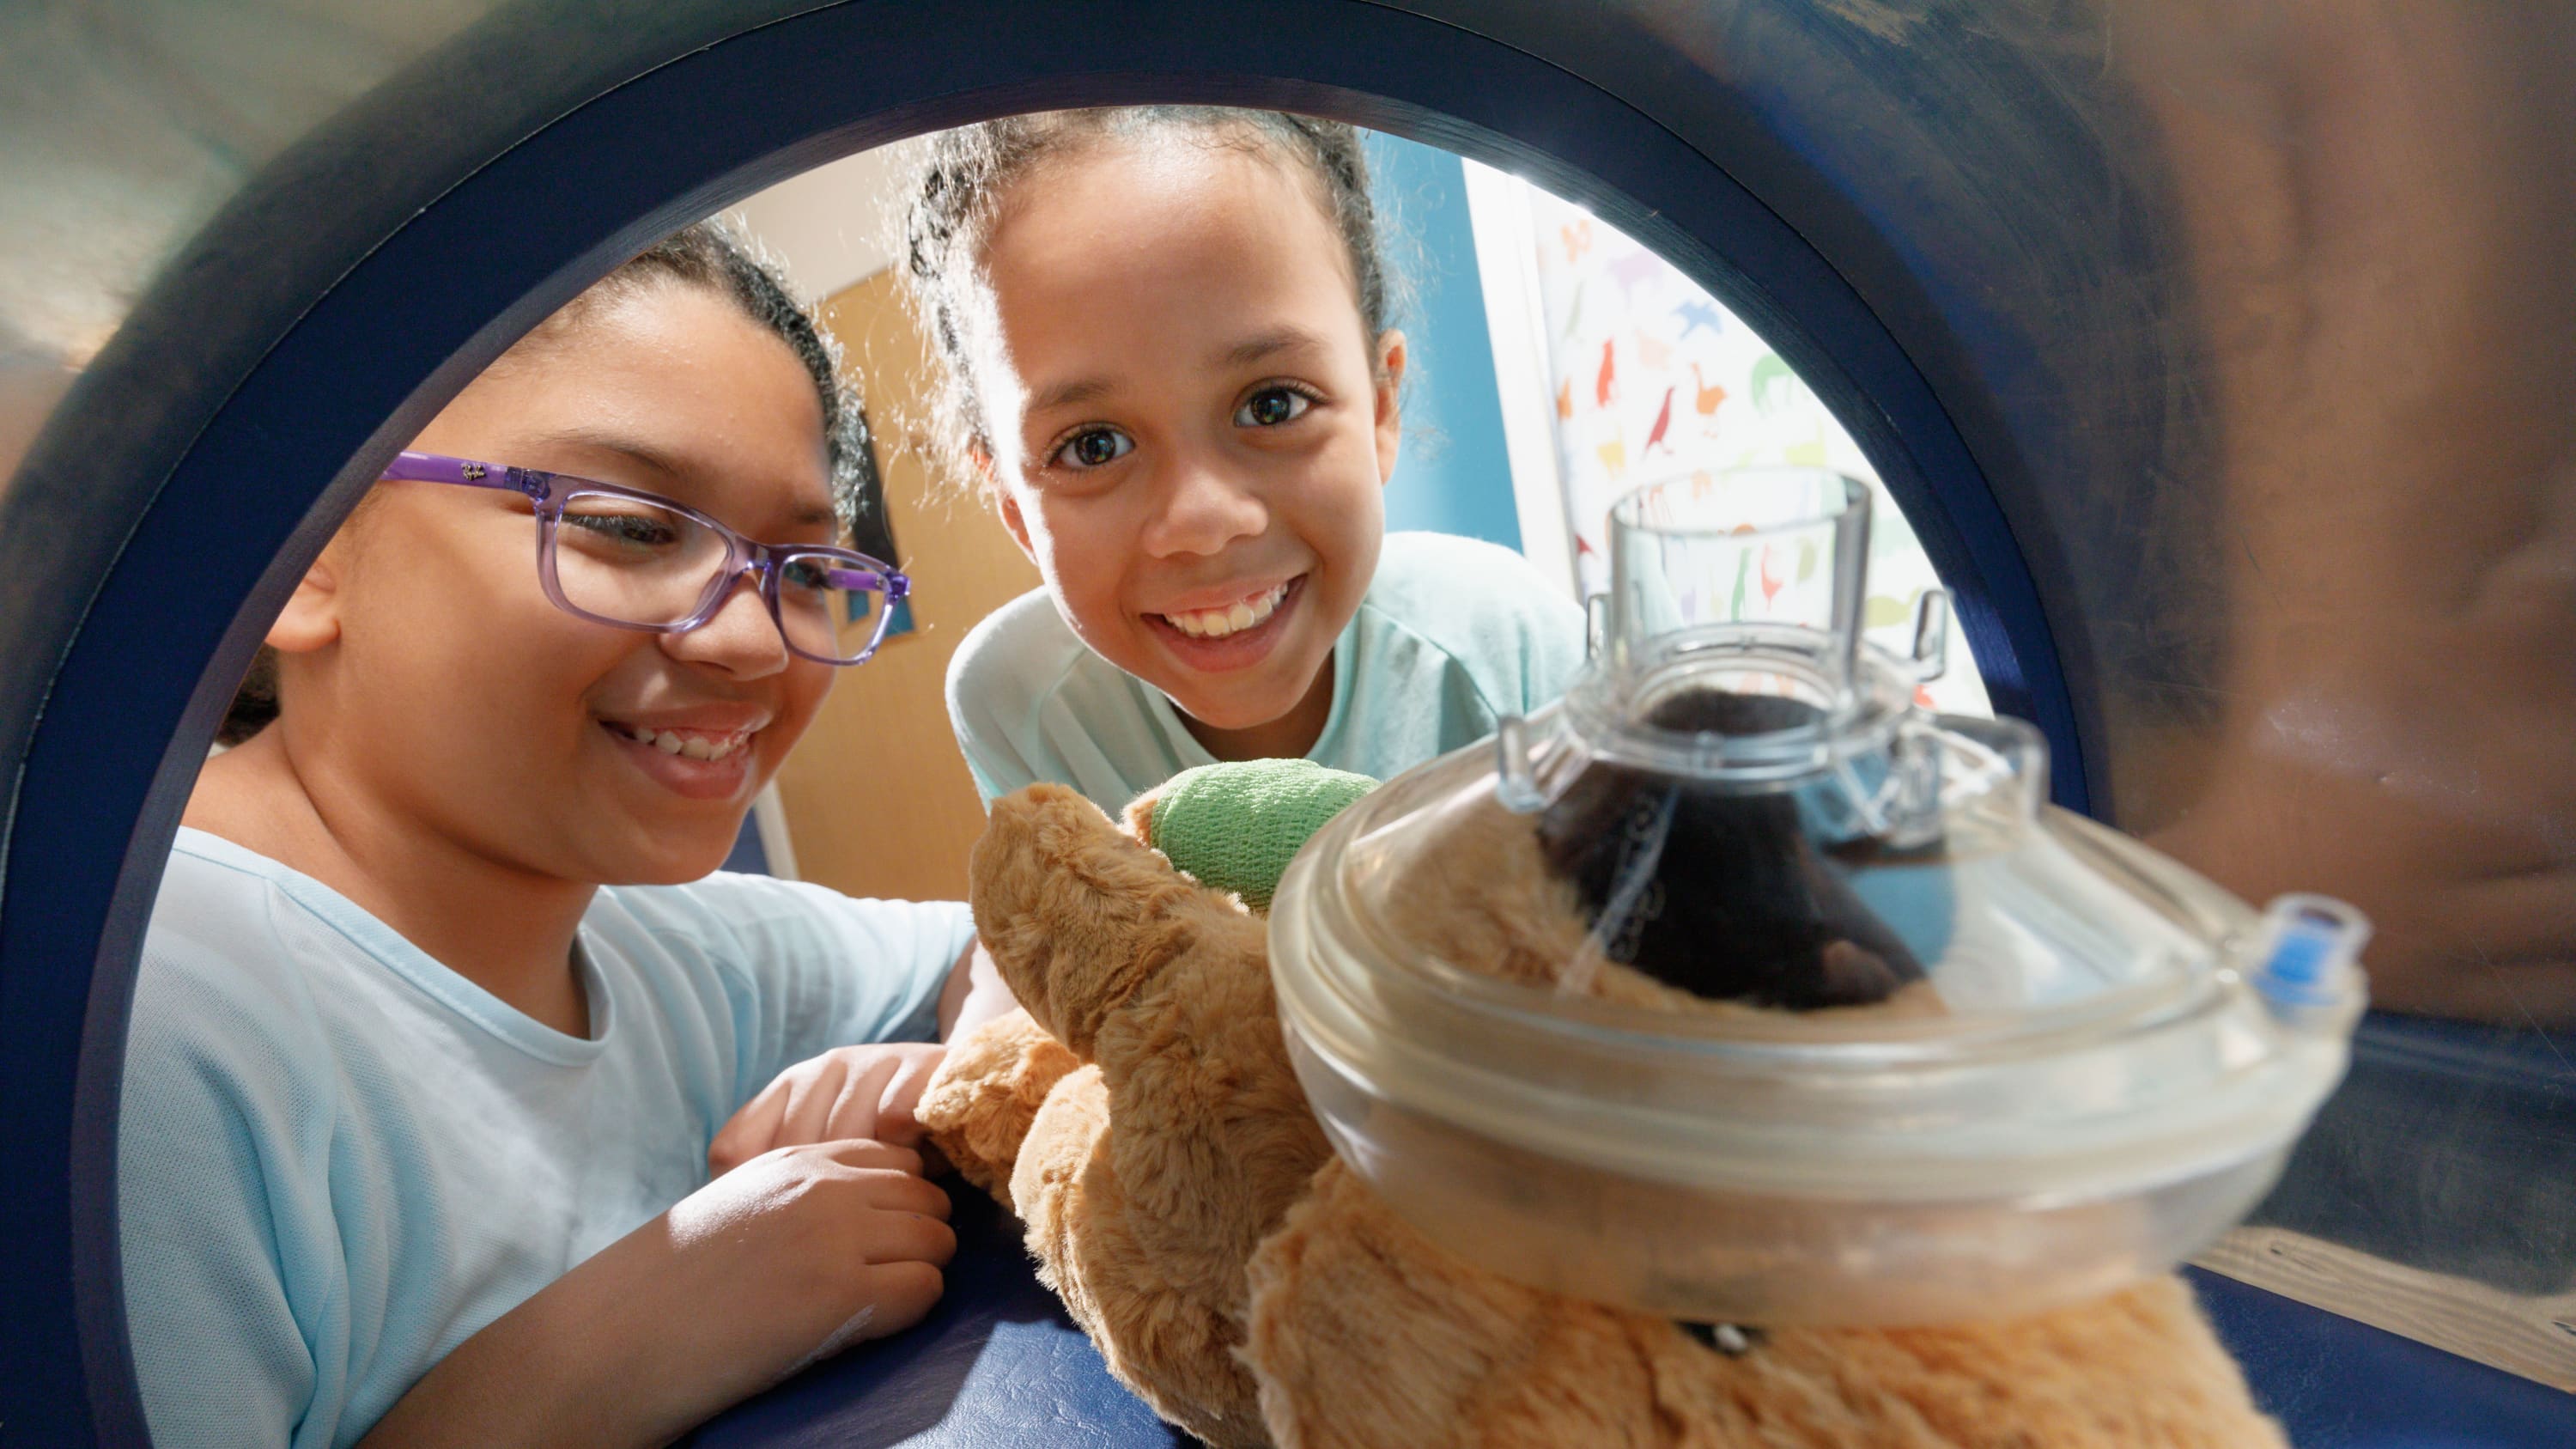 Leila, 8, and older sister Nadia, 10, use a toy MRI scanner on a menagerie of stuffed animals.